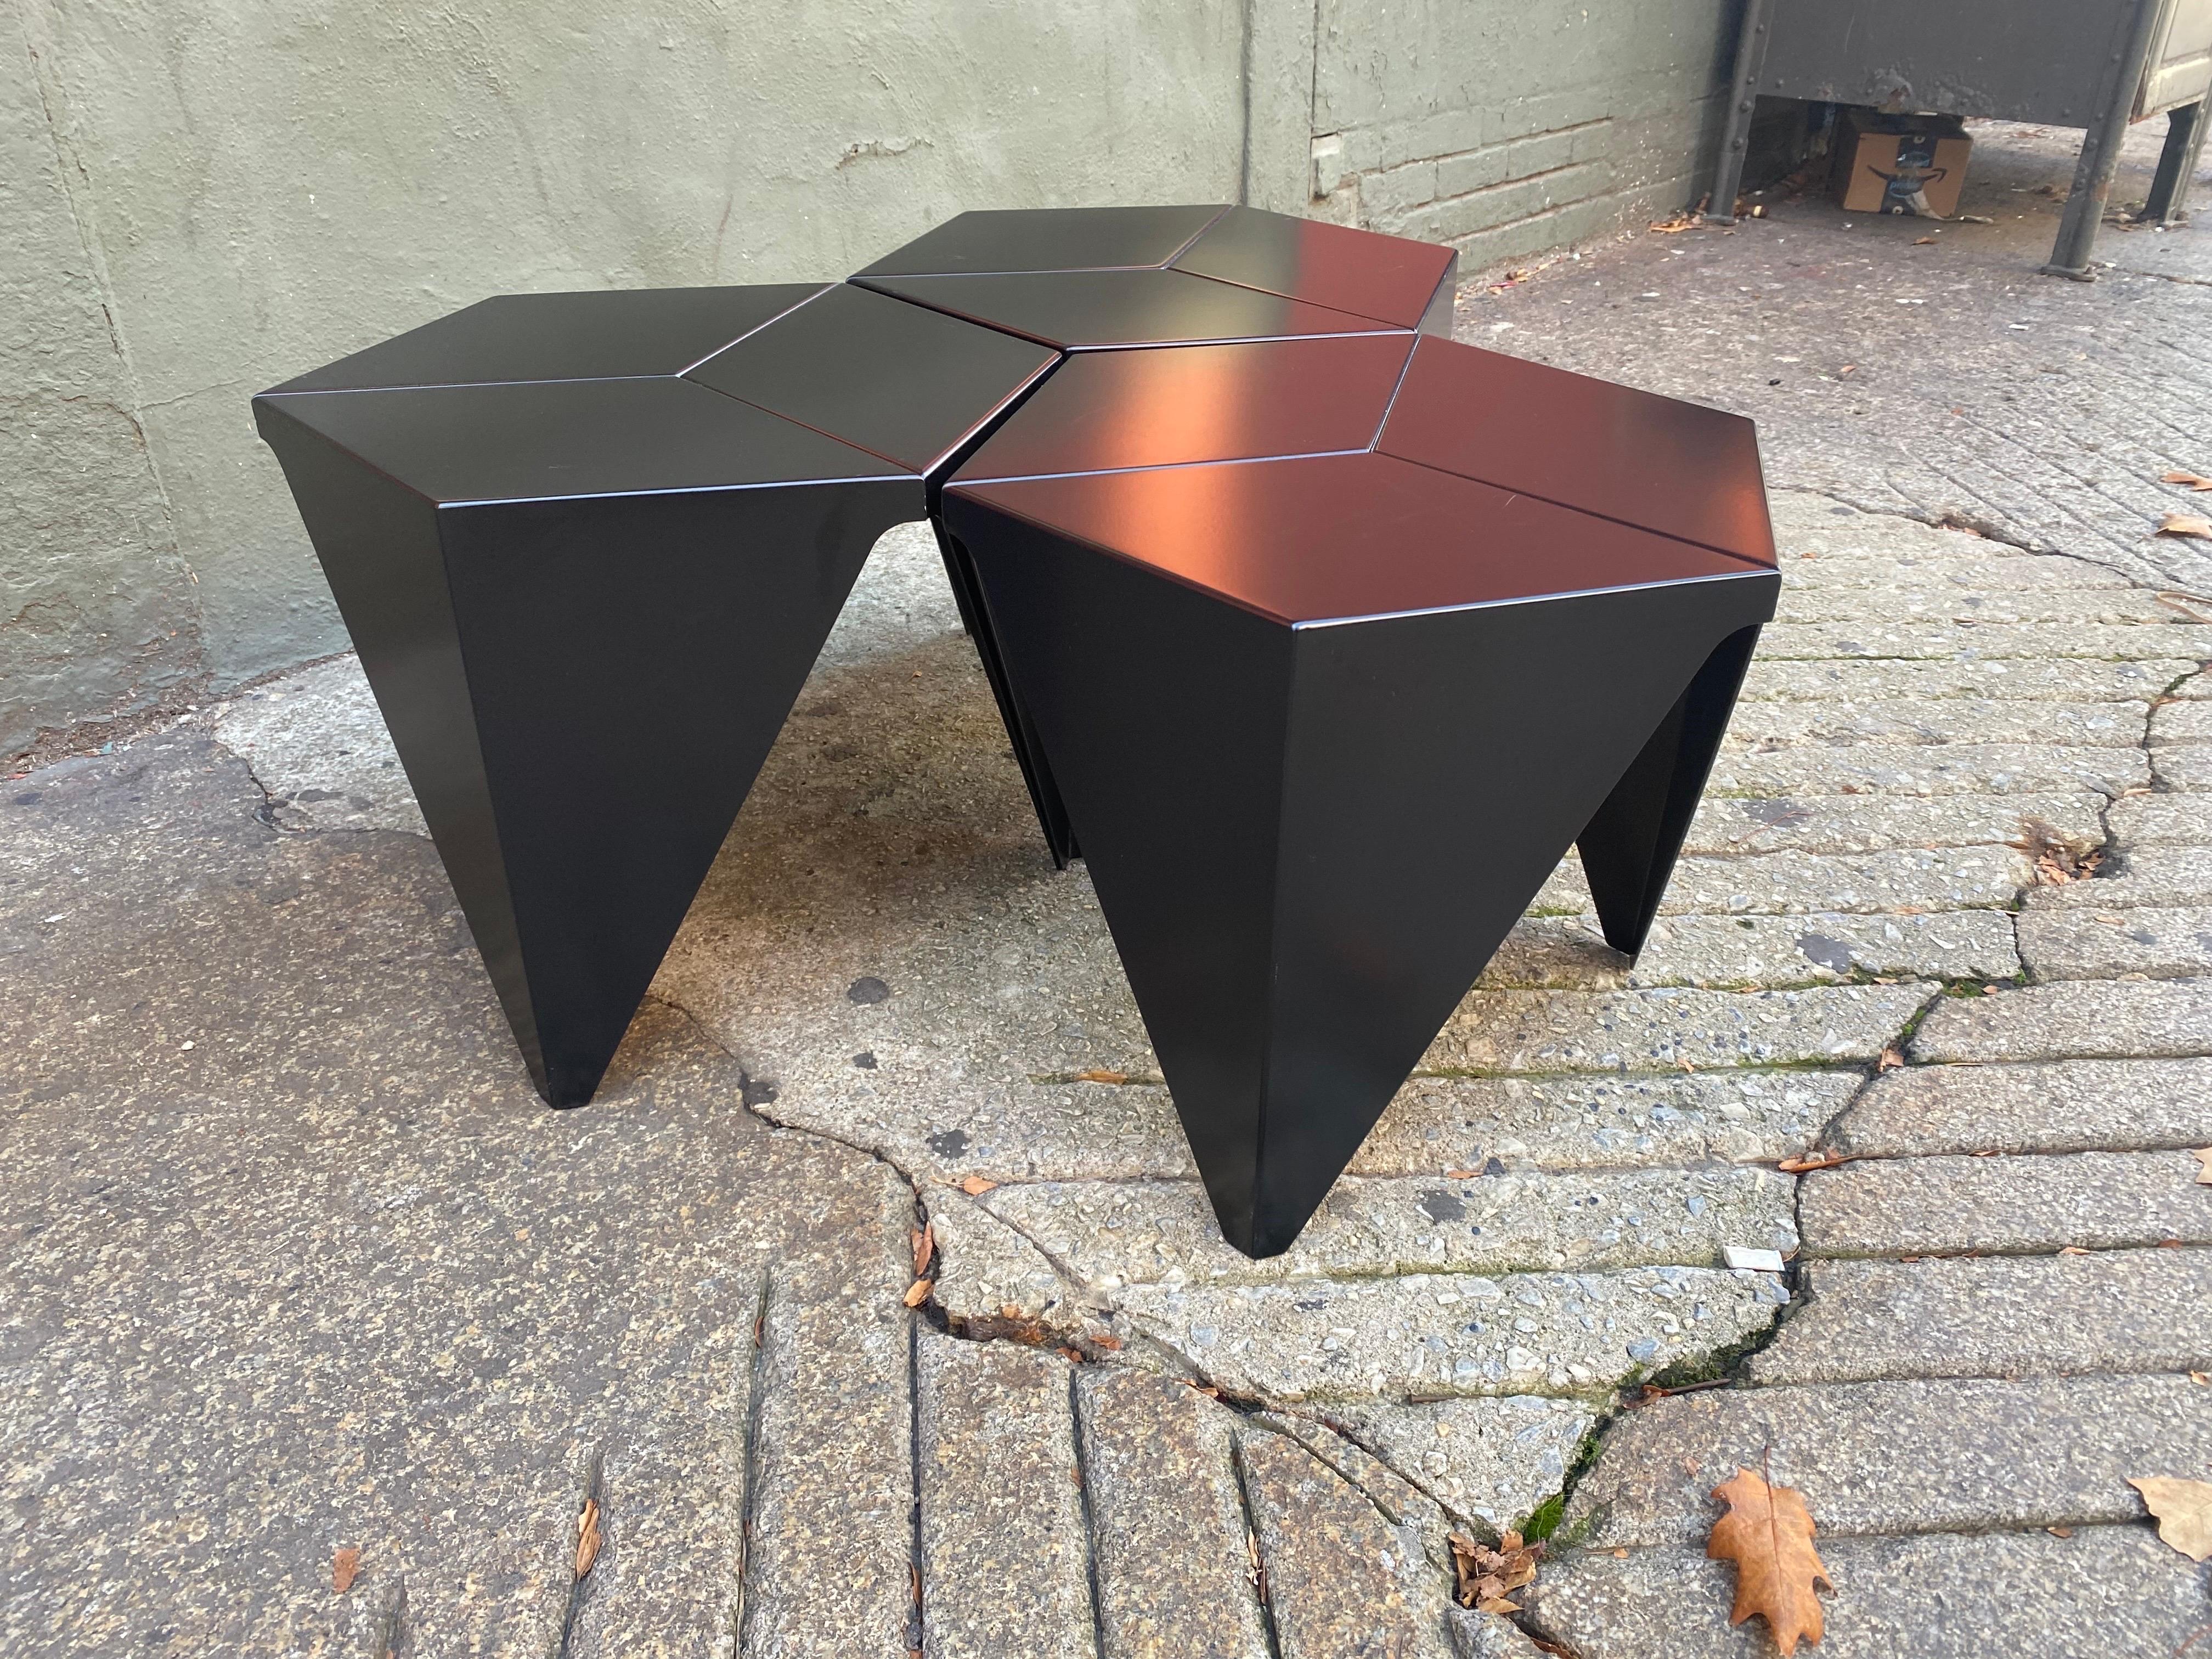 Isamu Noguchi Prismatic Tables.  1957 Design and put into production in 2002 by Vitra.  Black Finish shows minor surface wear.  Tables nest together or can be used separately!  Priced Individually! 2 Left!!